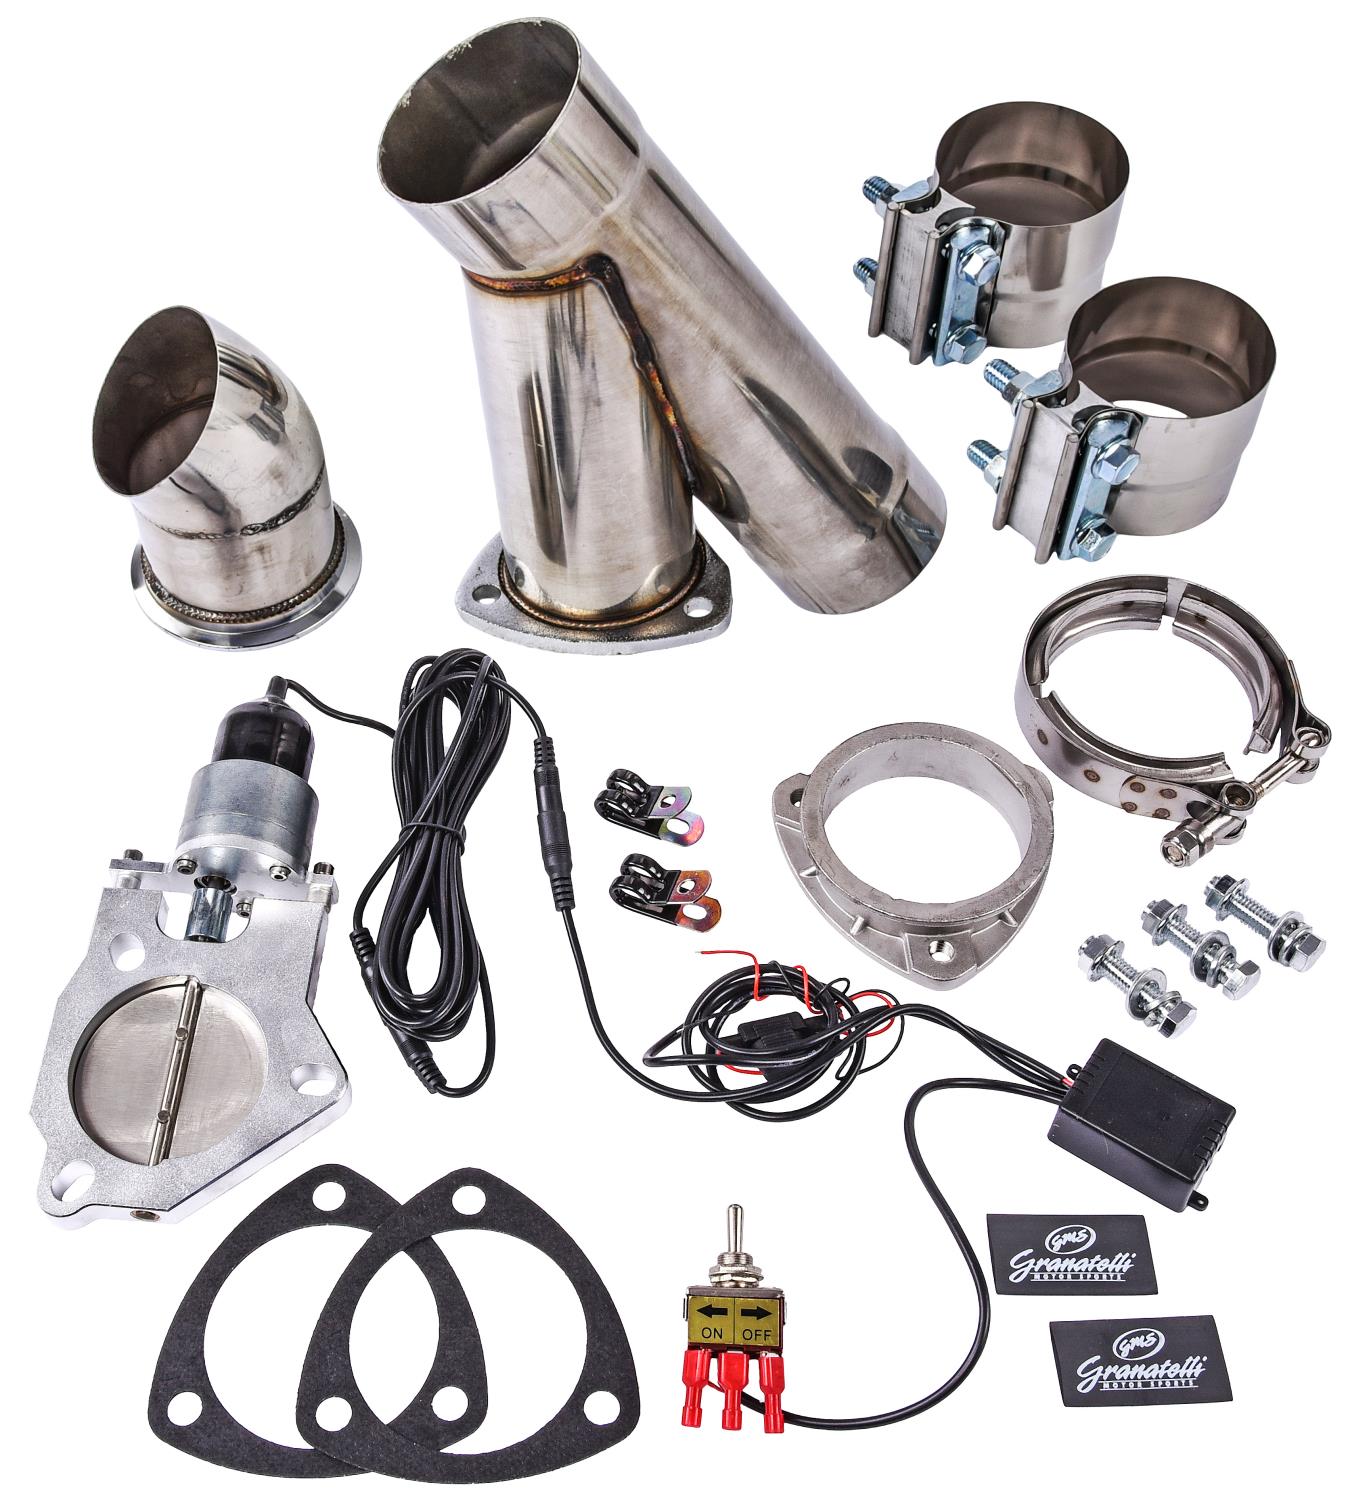 Electronic Stainless Steel Exhaust Cutout System for 3 in. Single Exhaust (Slip-Fit)